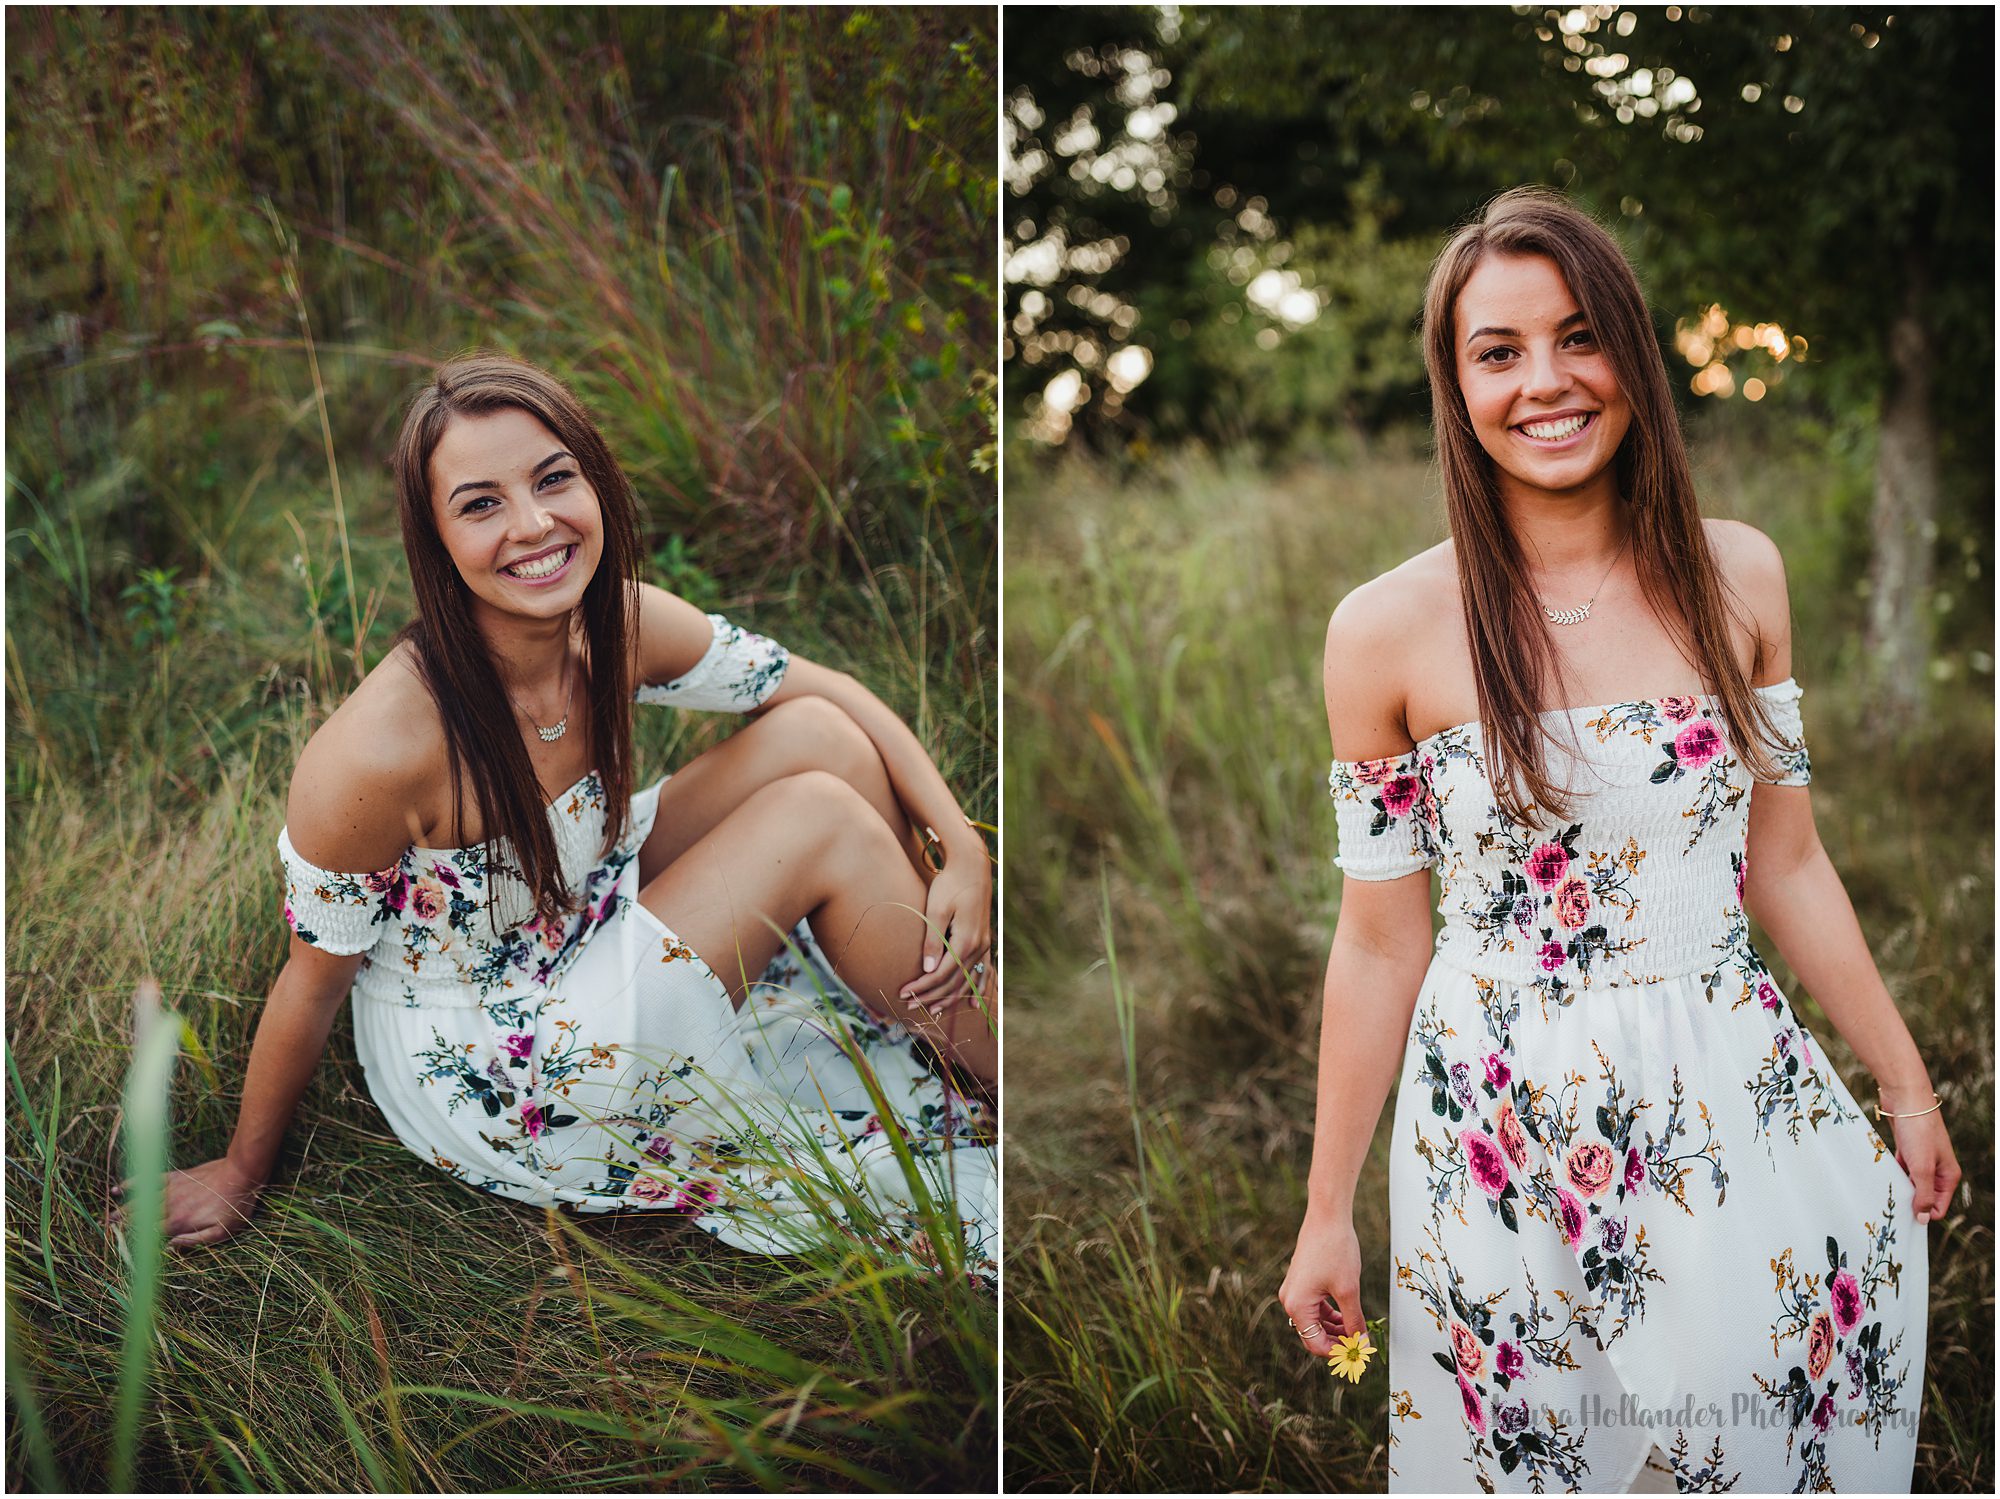 modern senior girl portraits with long dress in field, laura hollander photography, southwest michigan photographer